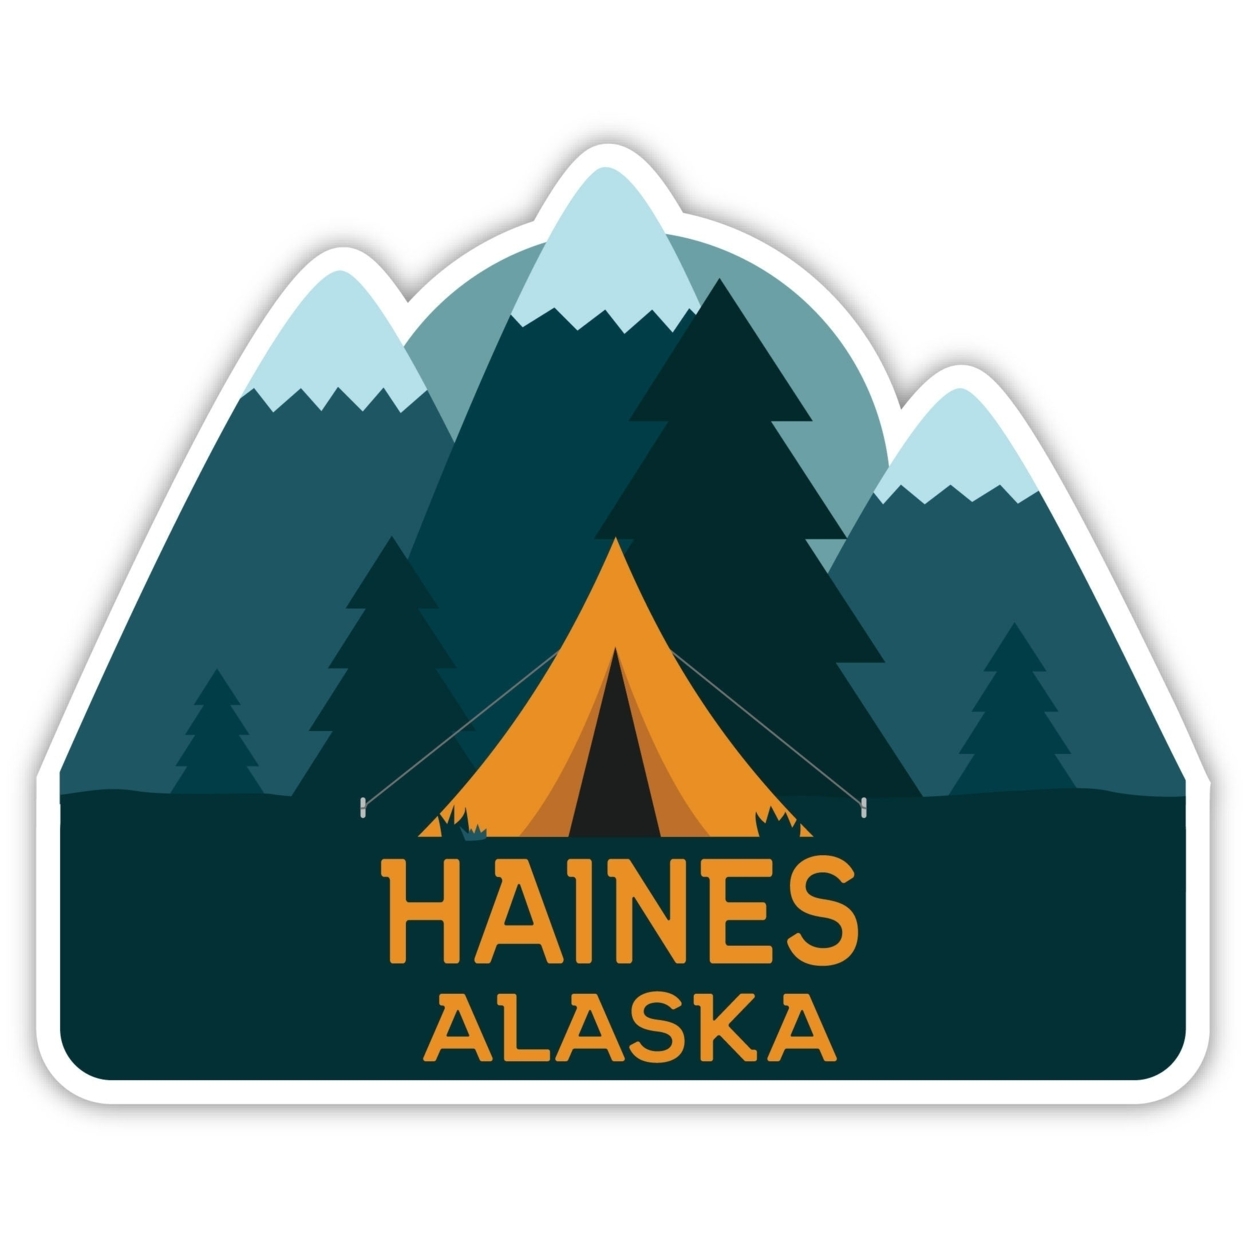 Haines Alaska Souvenir Decorative Stickers (Choose Theme And Size) - 4-Pack, 6-Inch, Tent